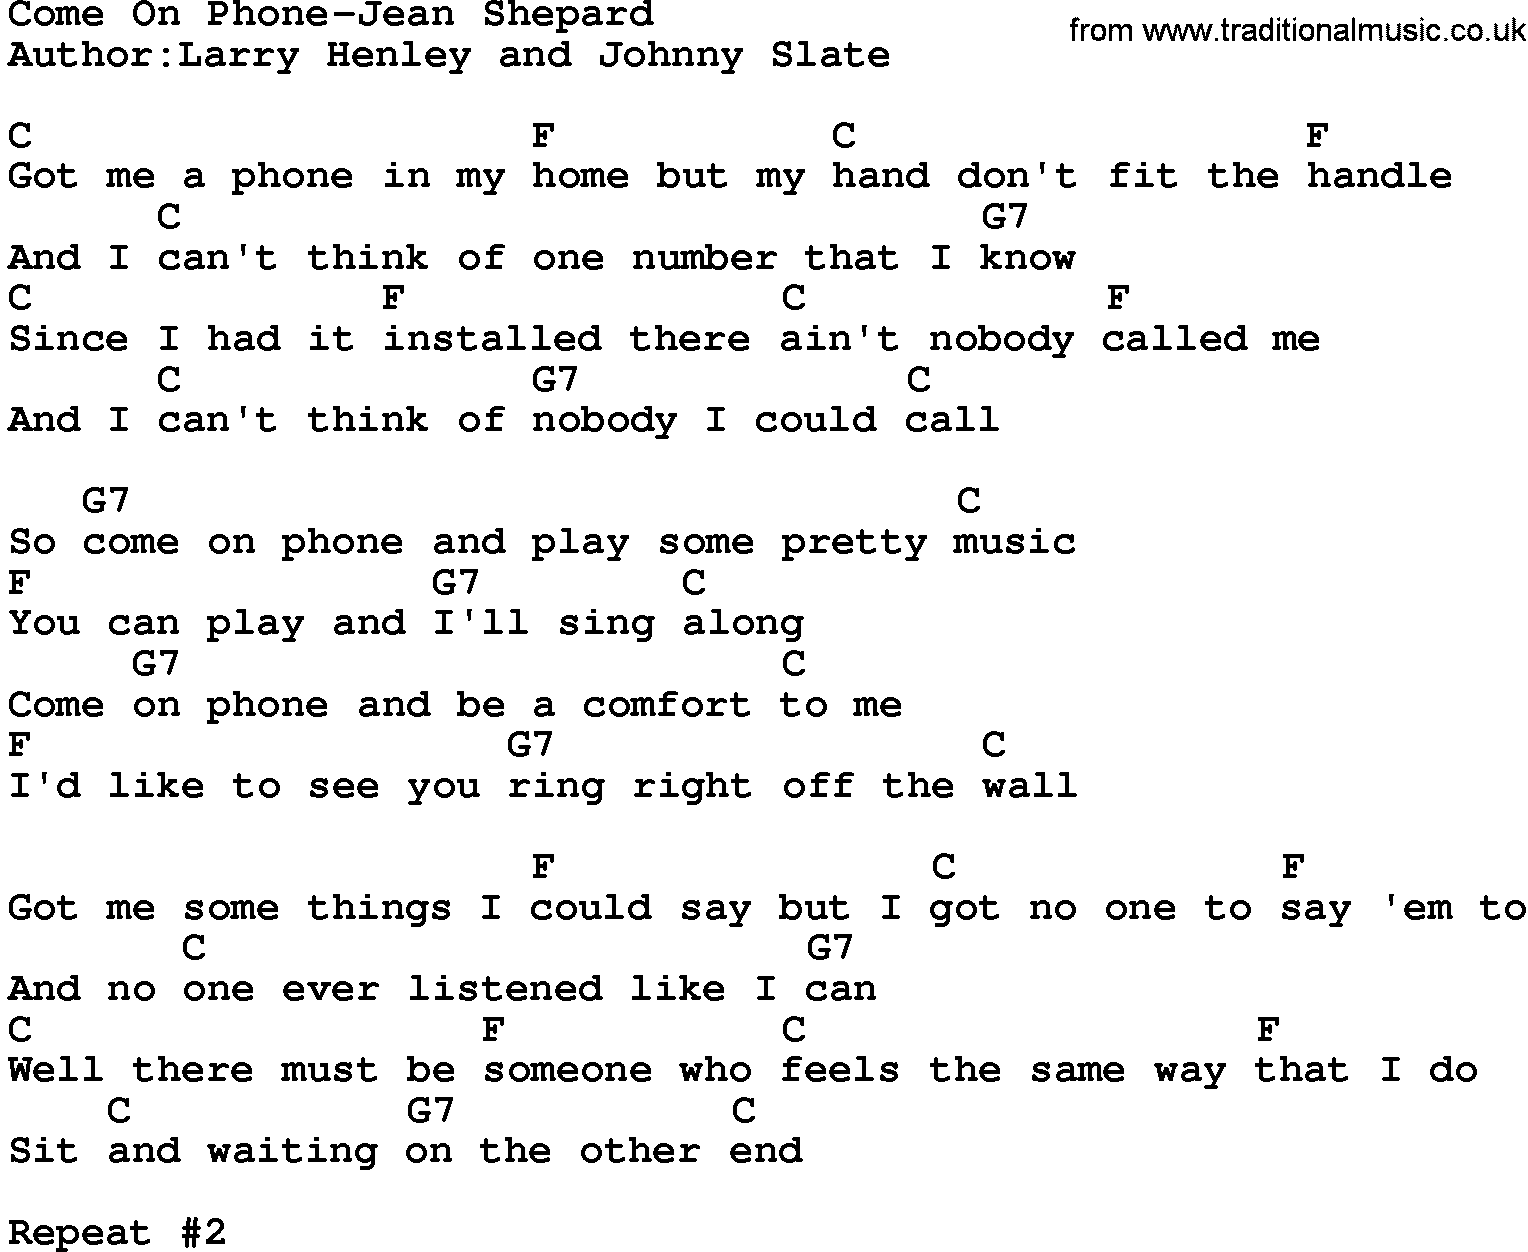 Country music song: Come On Phone-Jean Shepard lyrics and chords